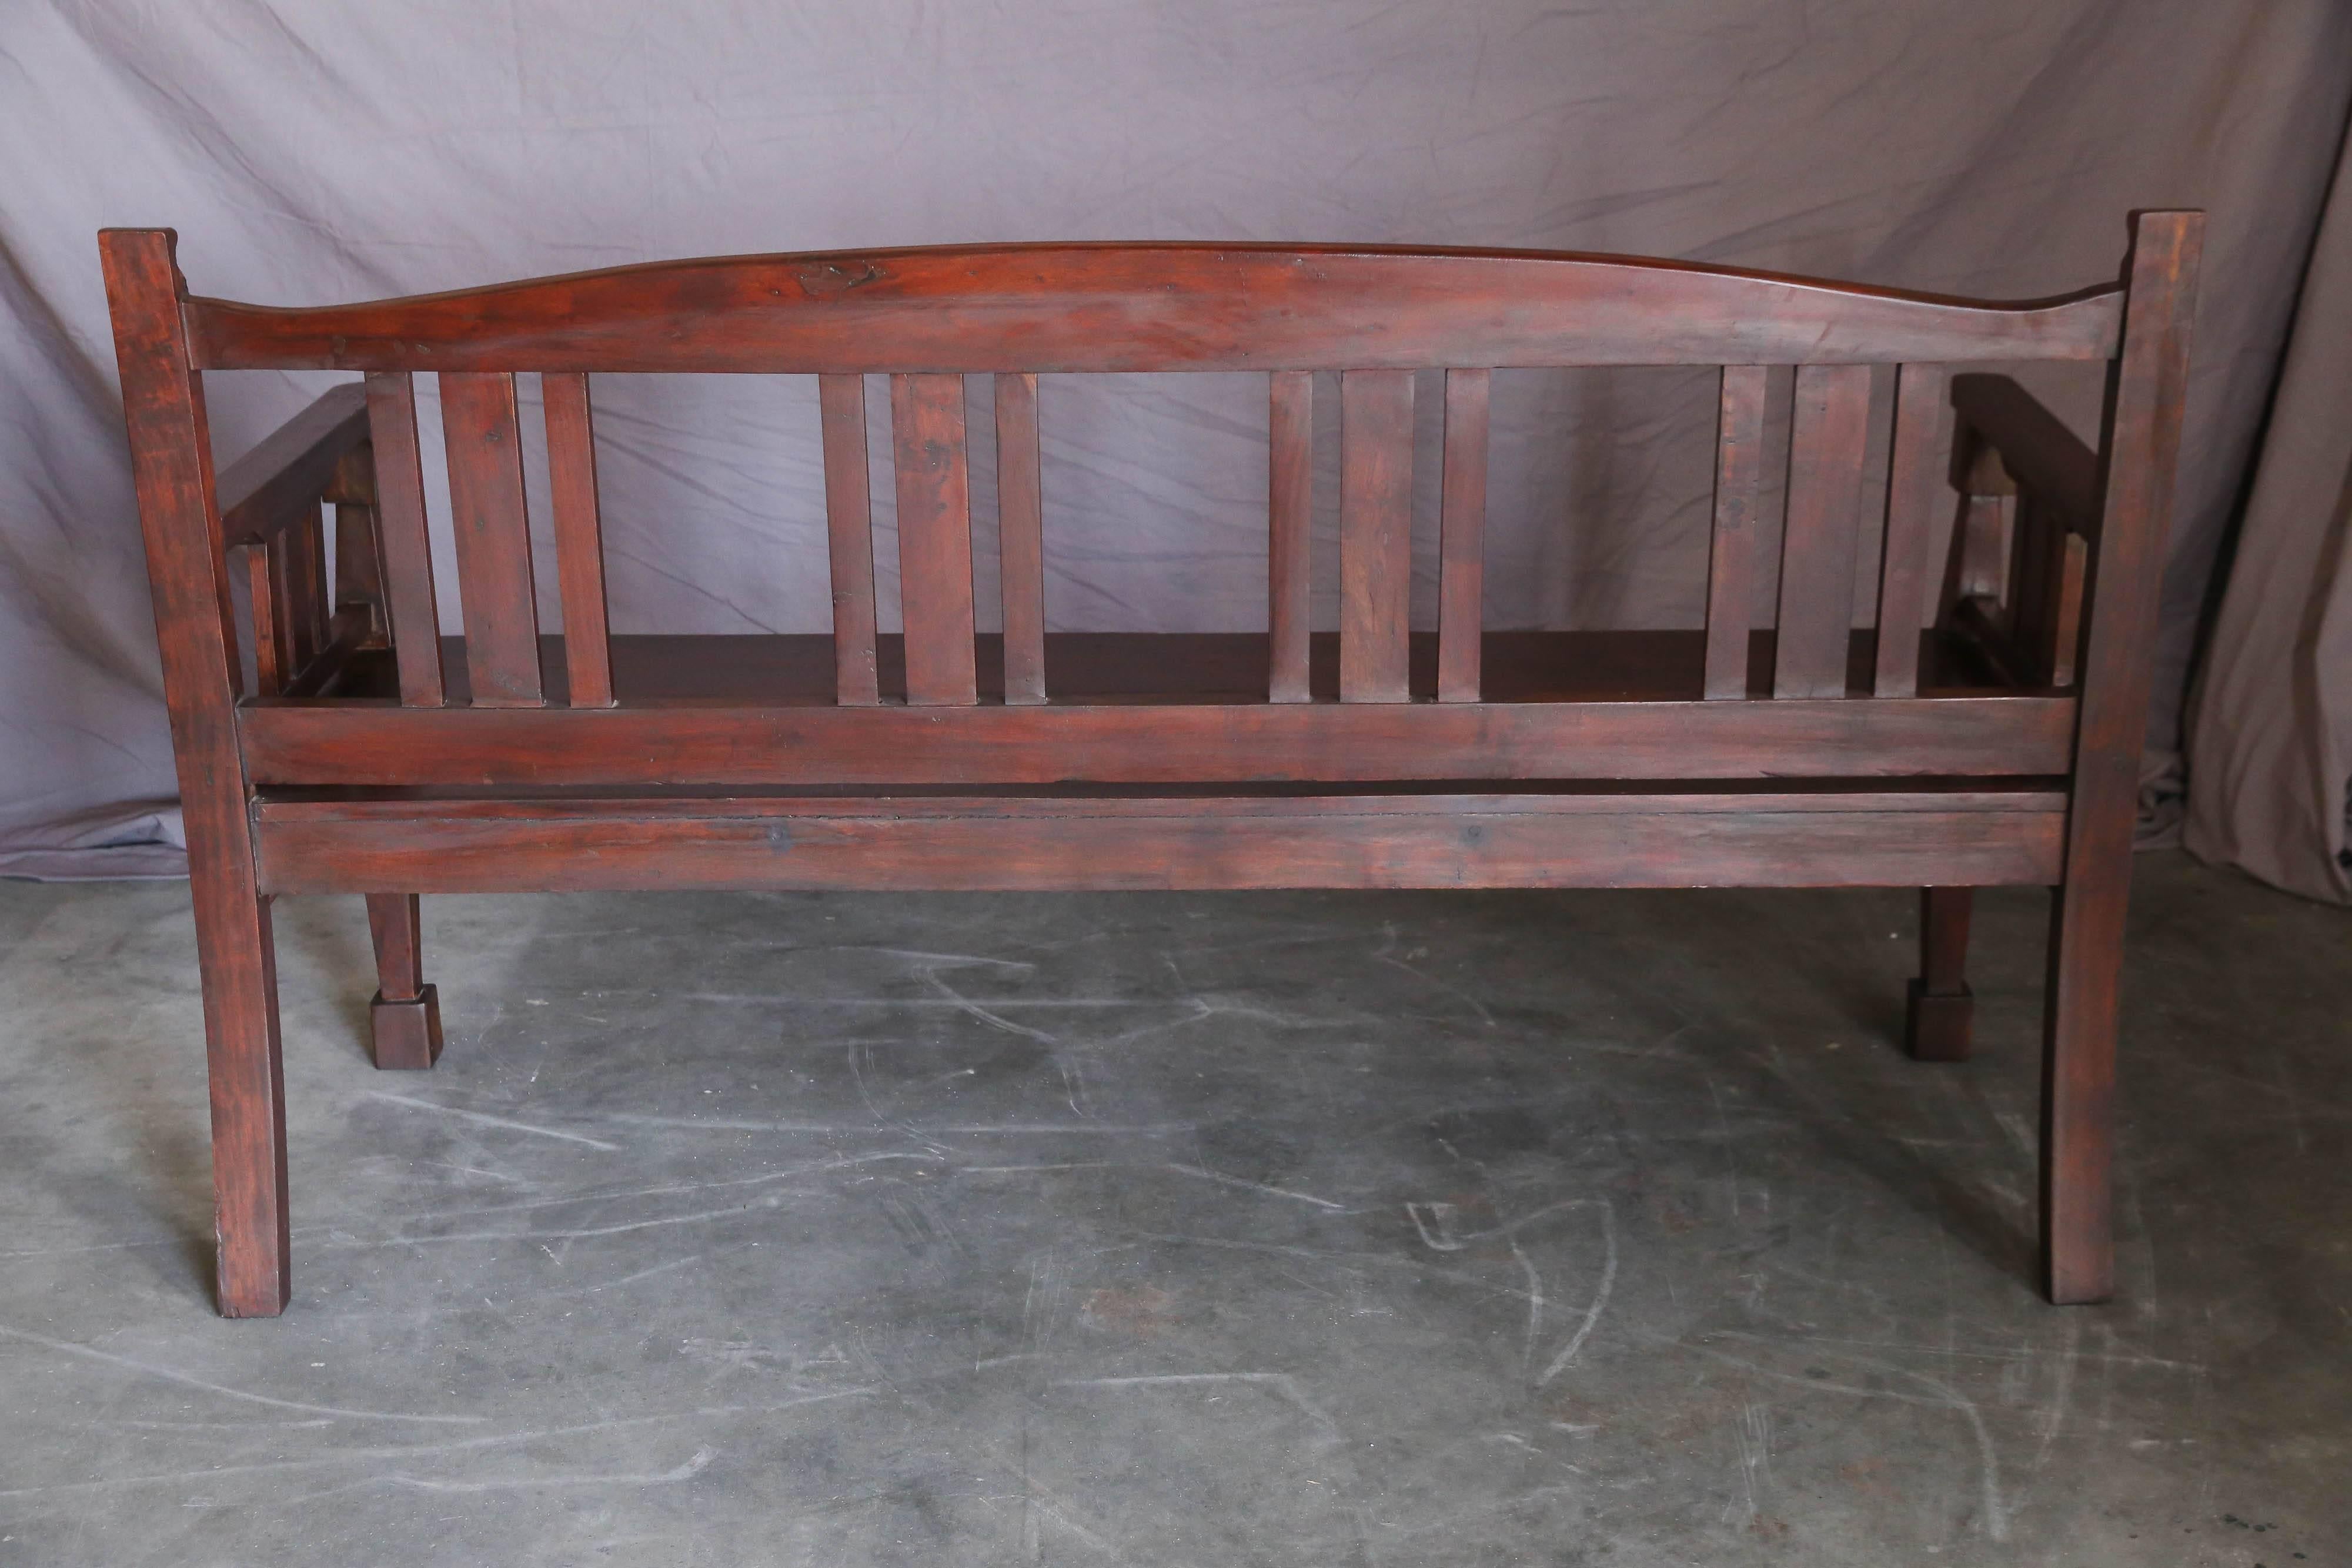 Late 19th Century Solid Teak Wood Typical Tea Plantation Bench from Darjeeling For Sale 4